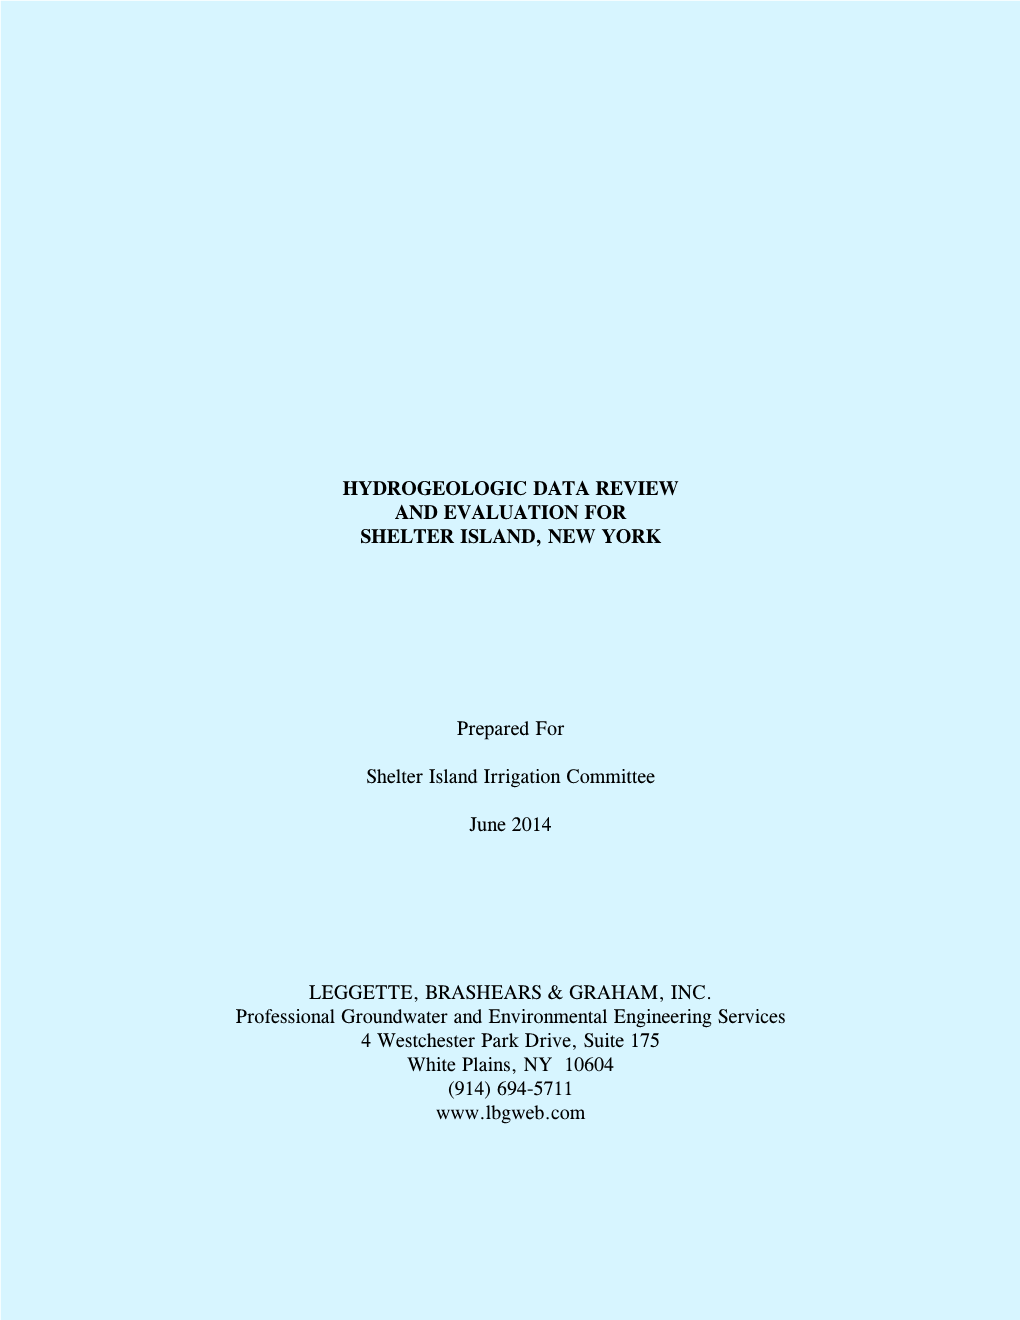 Hydrogeologic Data Review and Evaluation for Shelter Island, New York